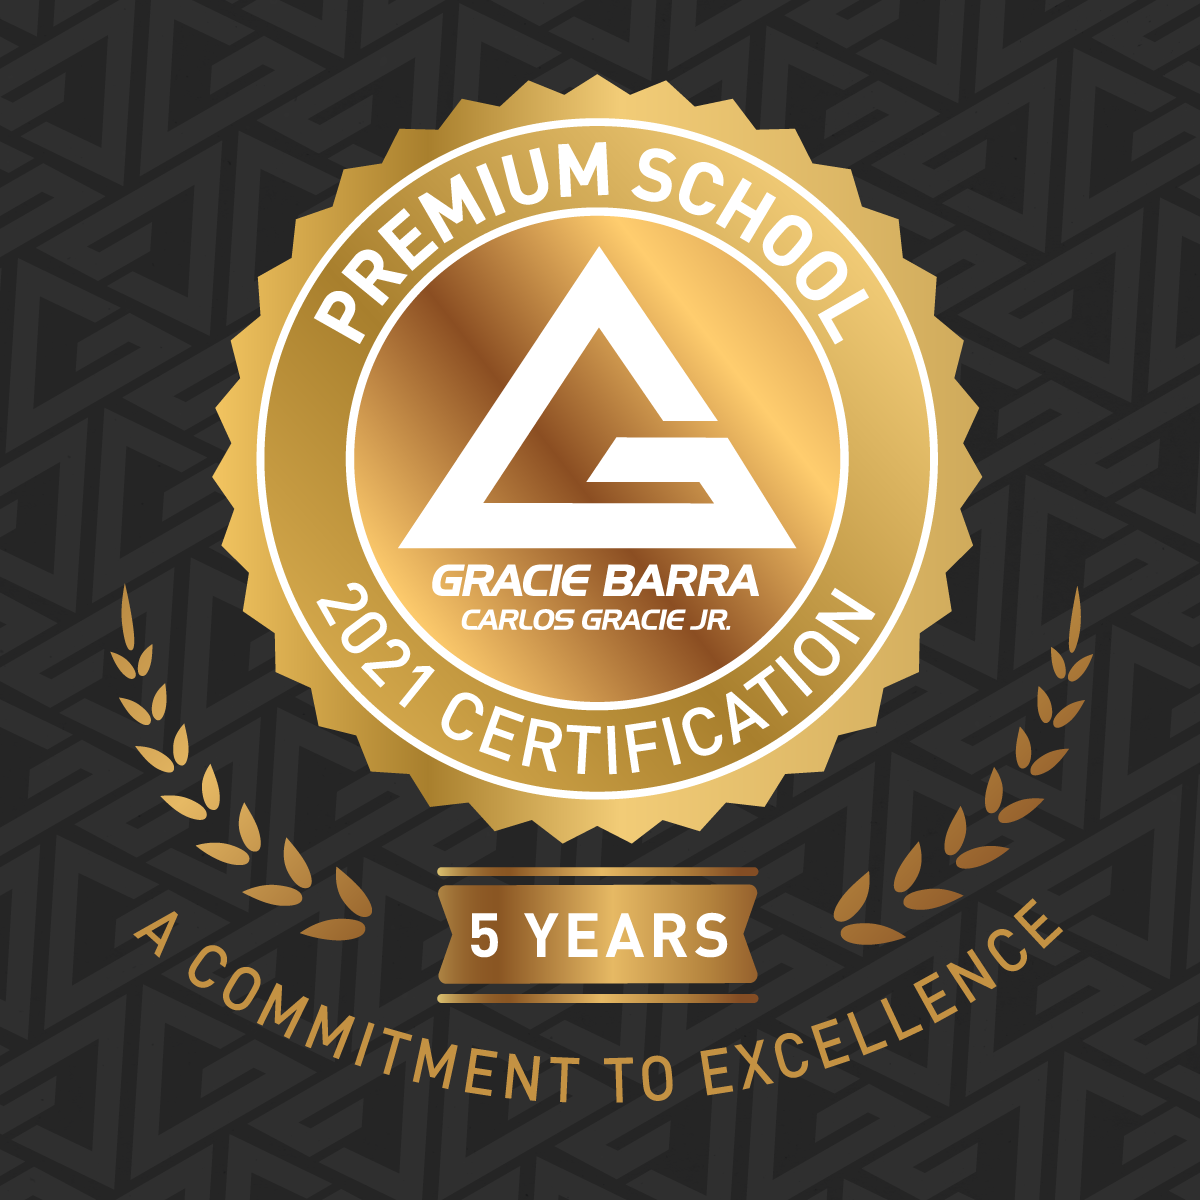 We are a Certified Premium School image